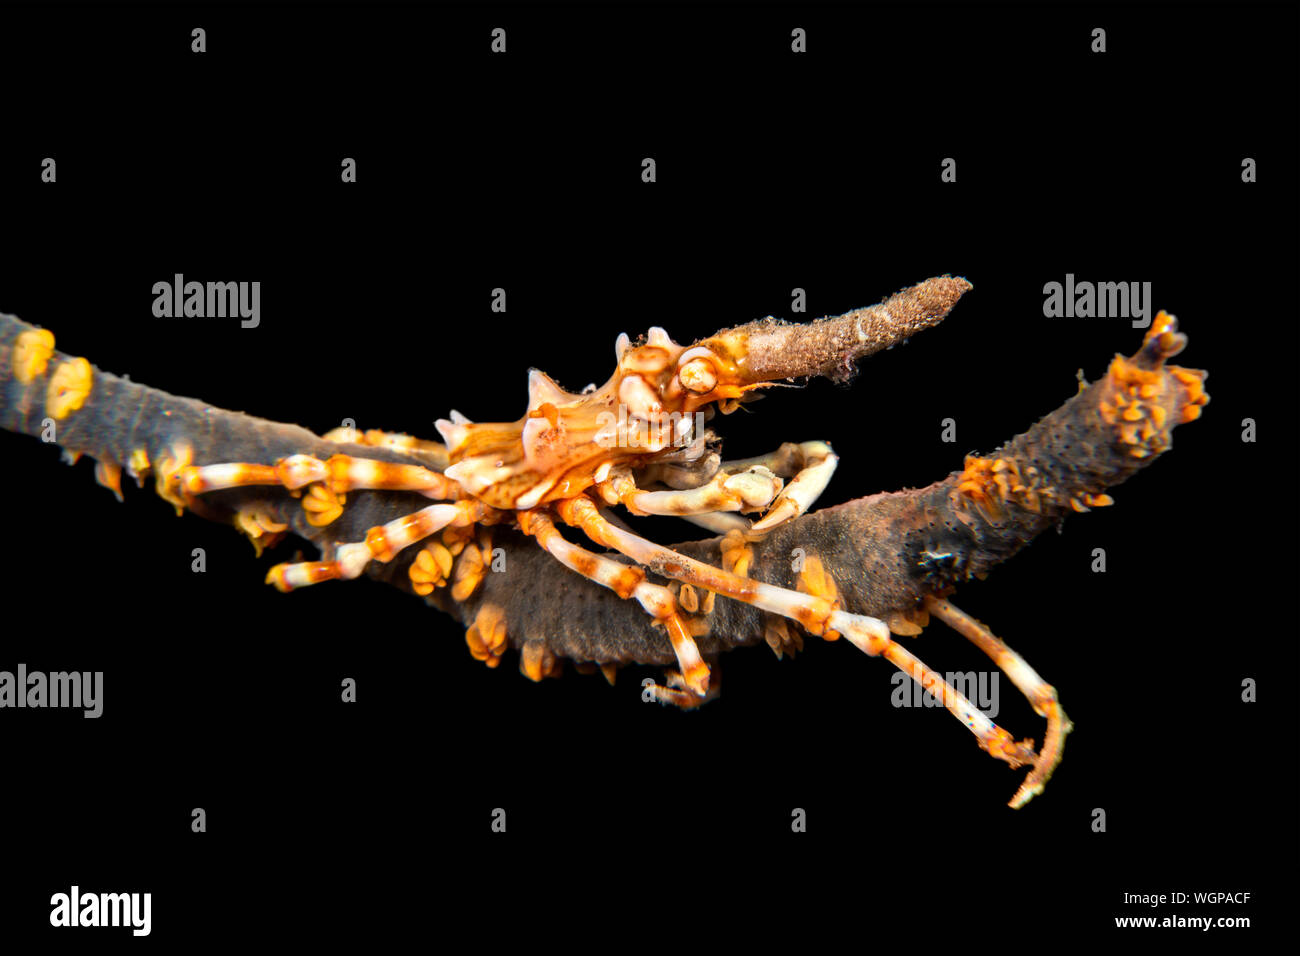 A tiny Xeno wire coral crab on a strand of whip coral at night hunts for small detritus particles drifting in the water. Stock Photo